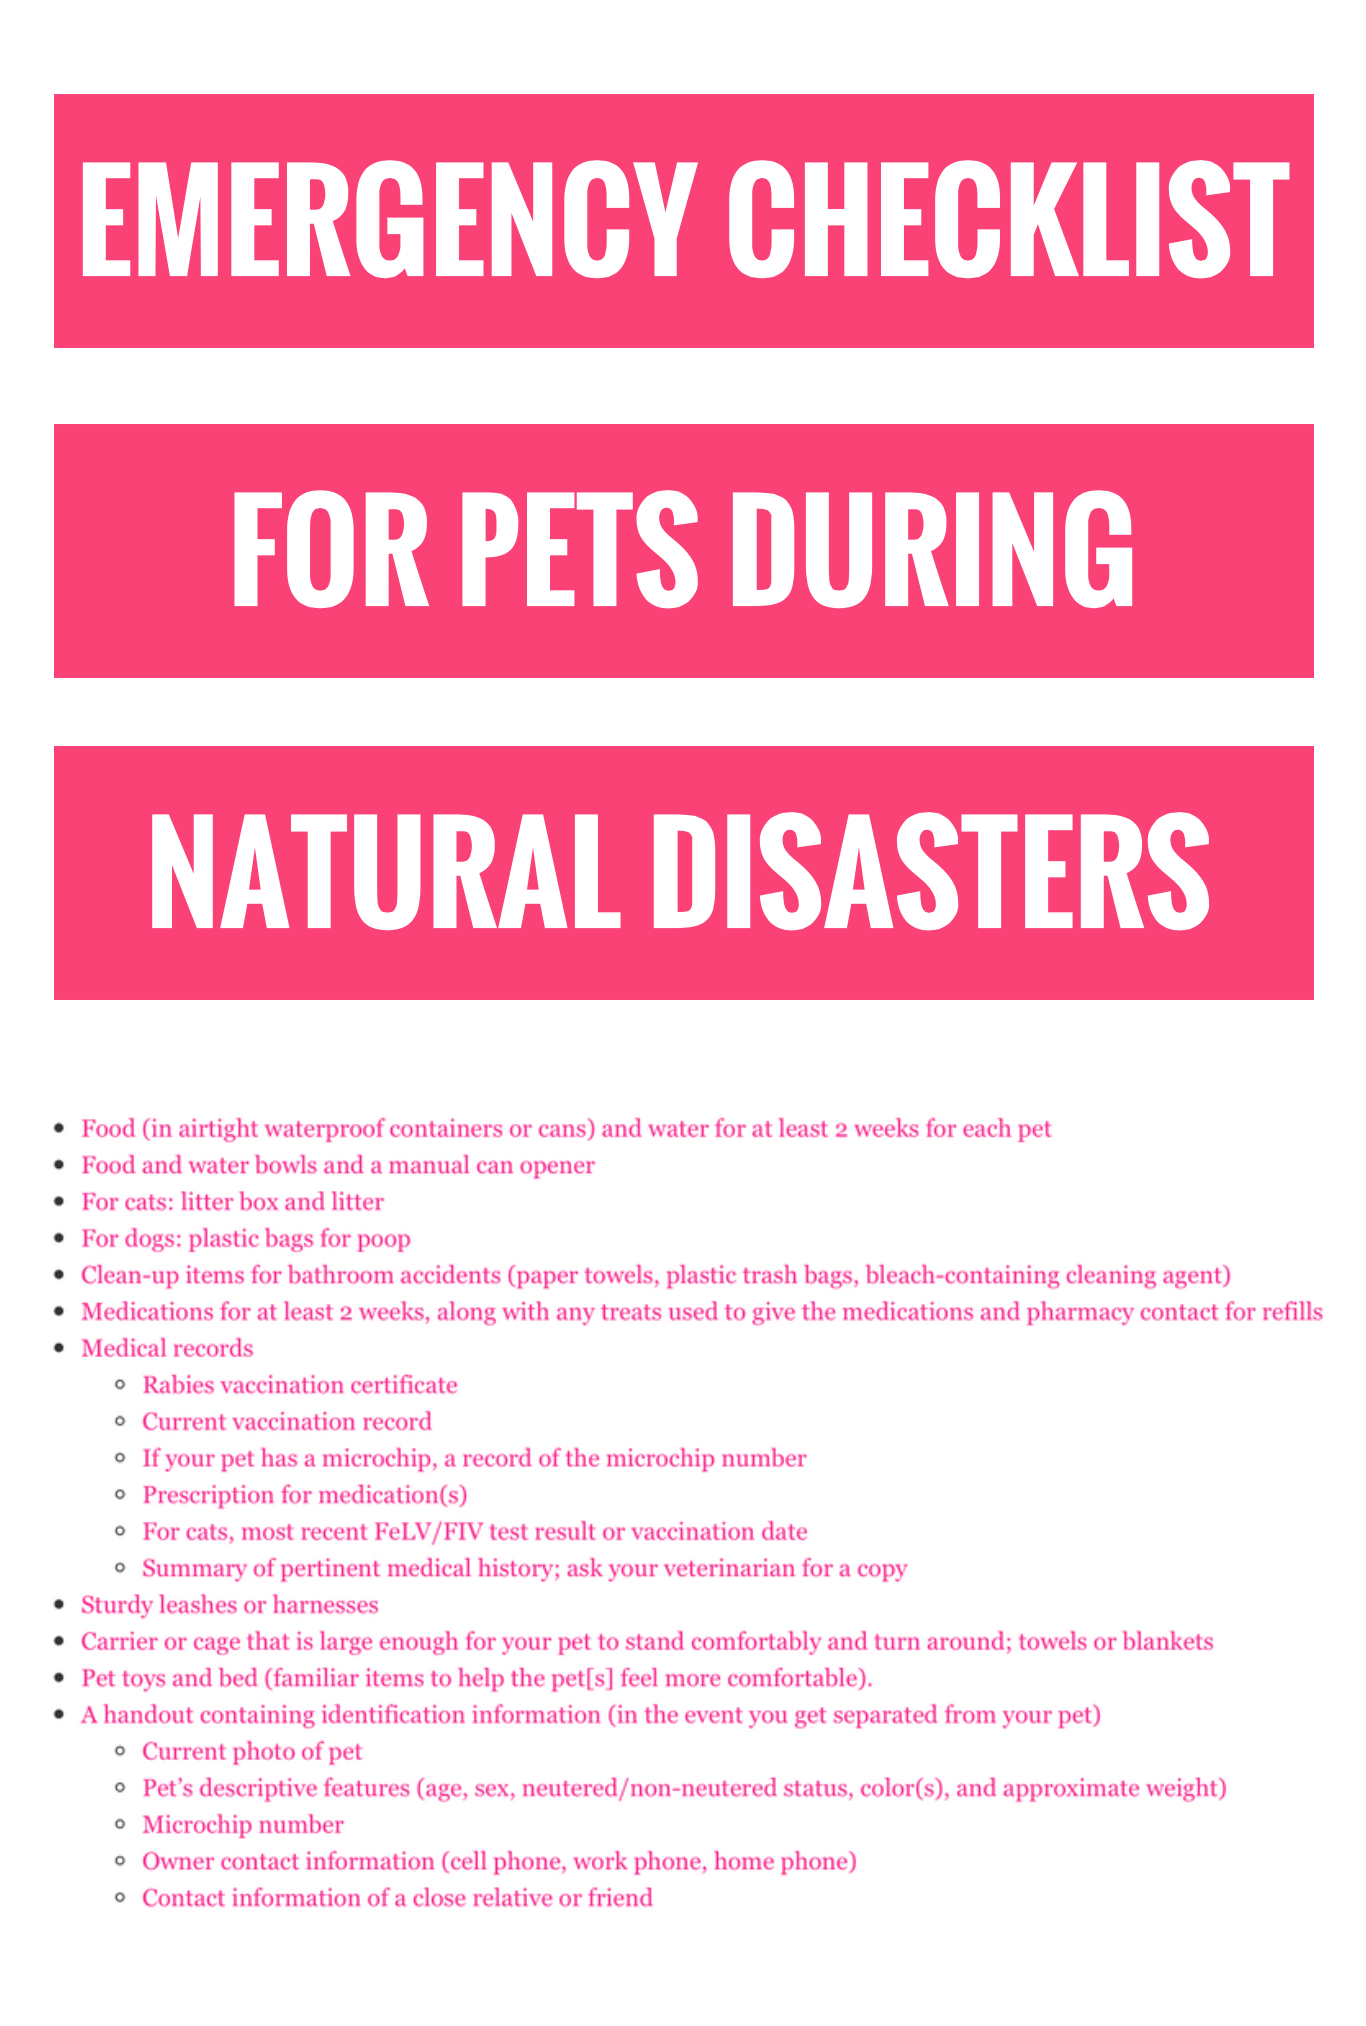 Keeping Your Pet Safe During Natural Disasters - Emergency Checklist For Pets - Communikait by Kait Hanson